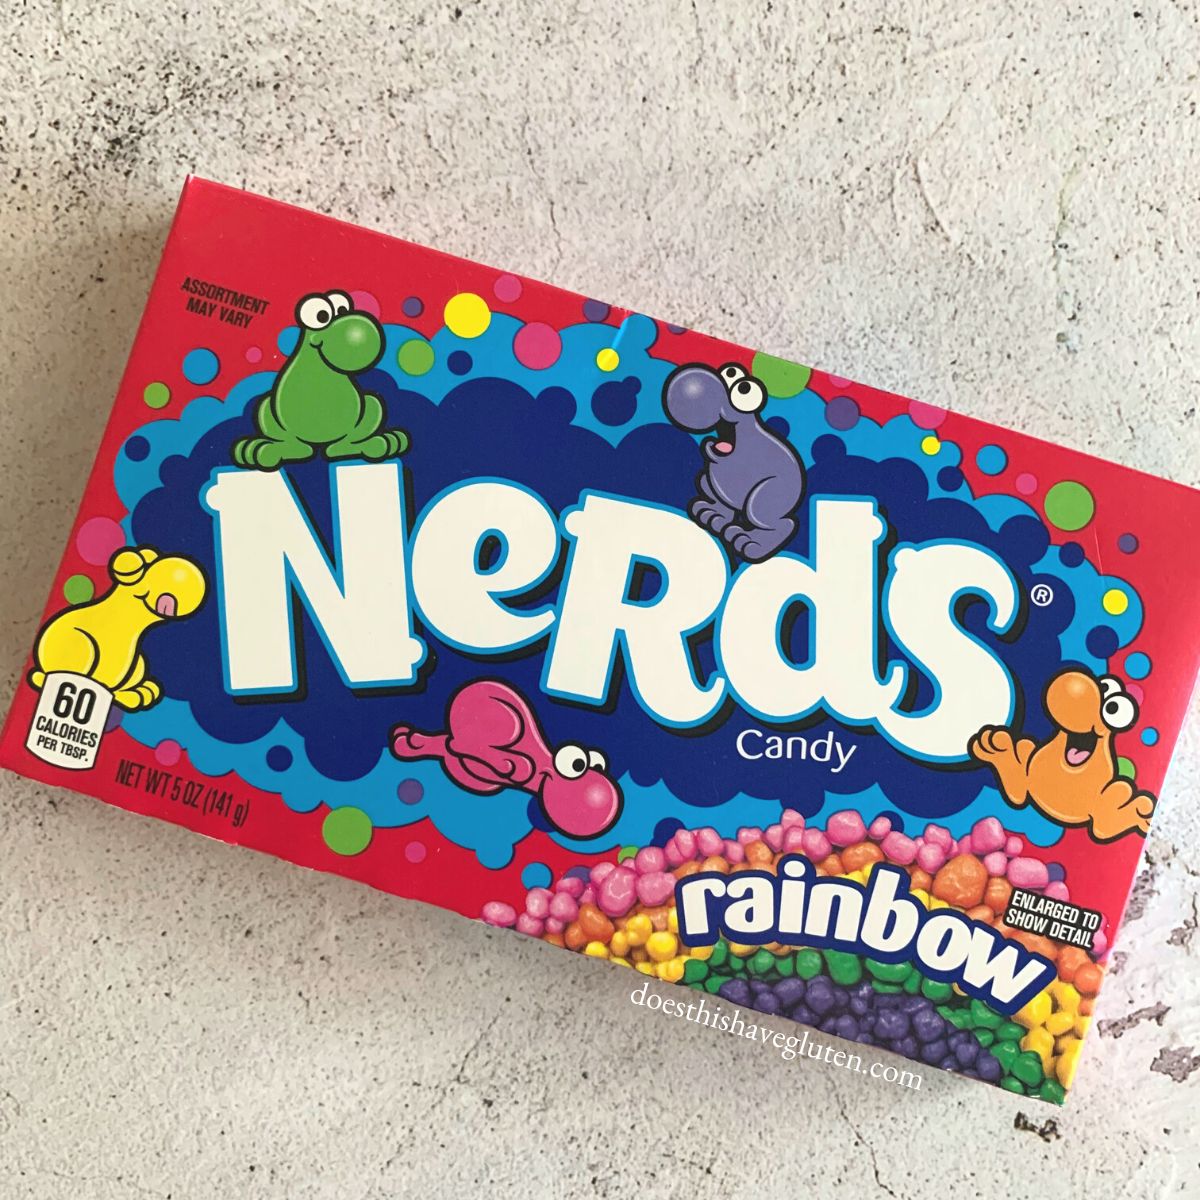 A box of nerds candy on a counter.